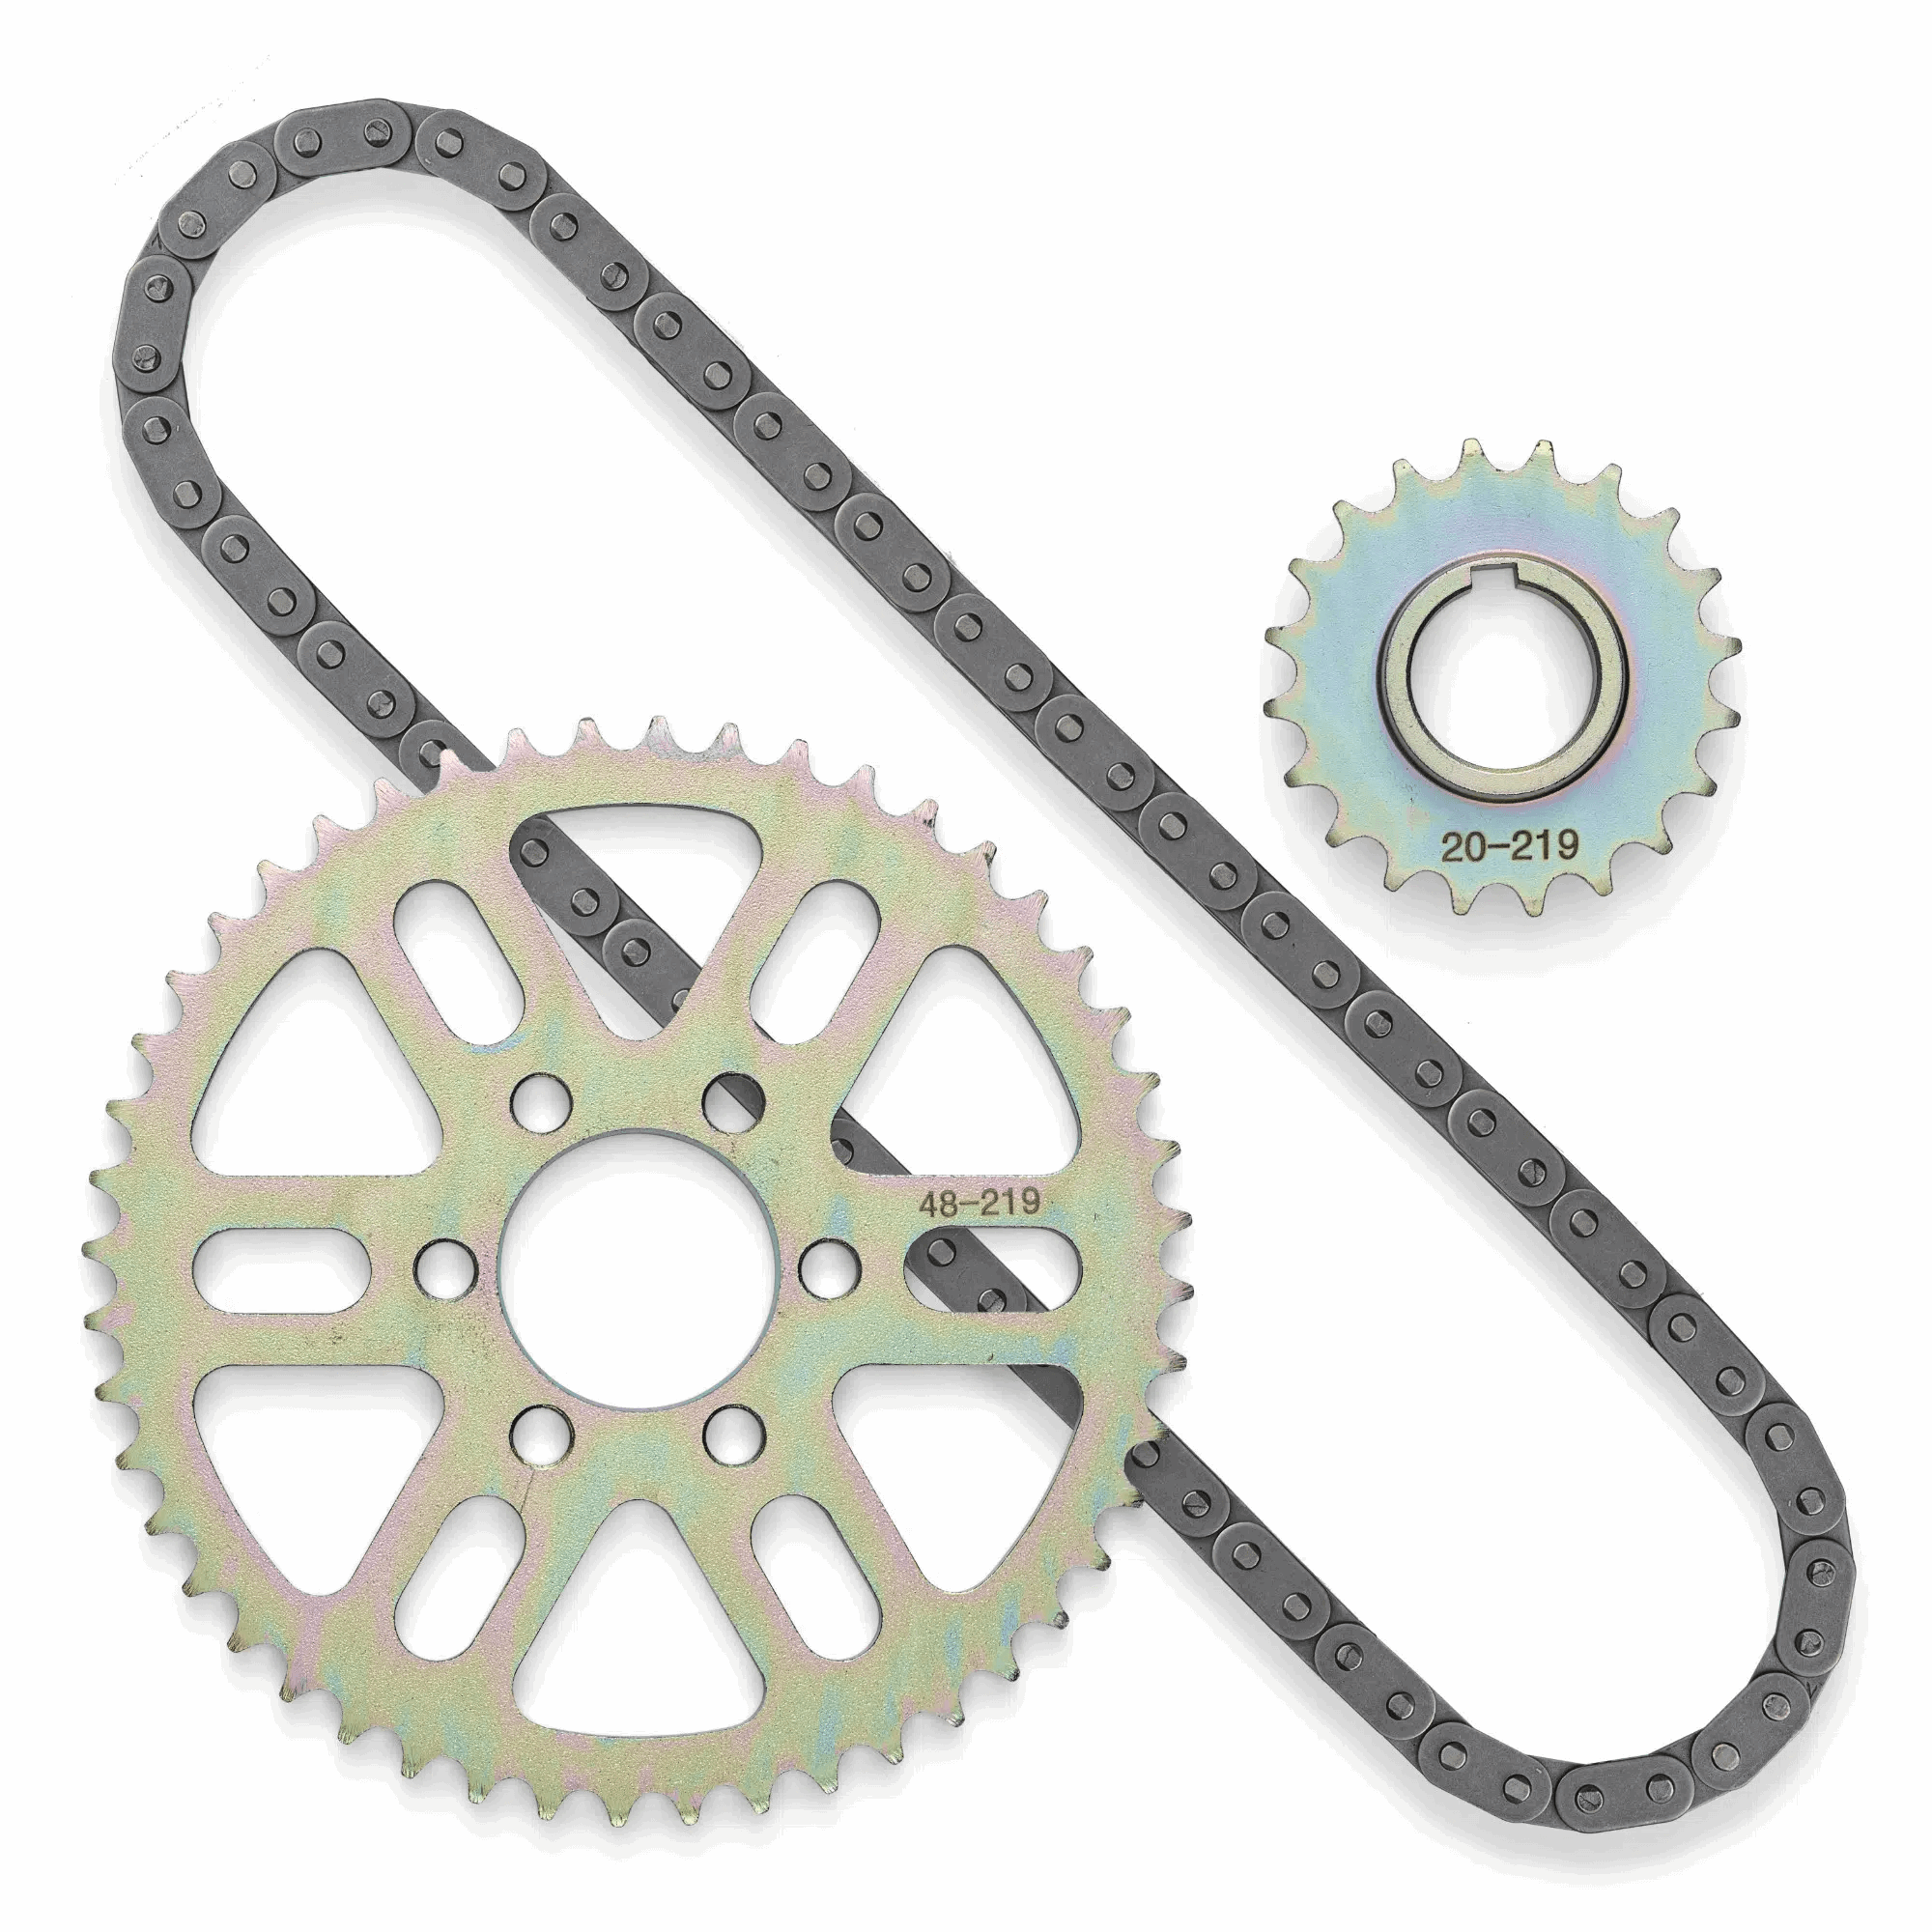 Primary chain drive conversion kit for surron Light bee X 219 chain kit